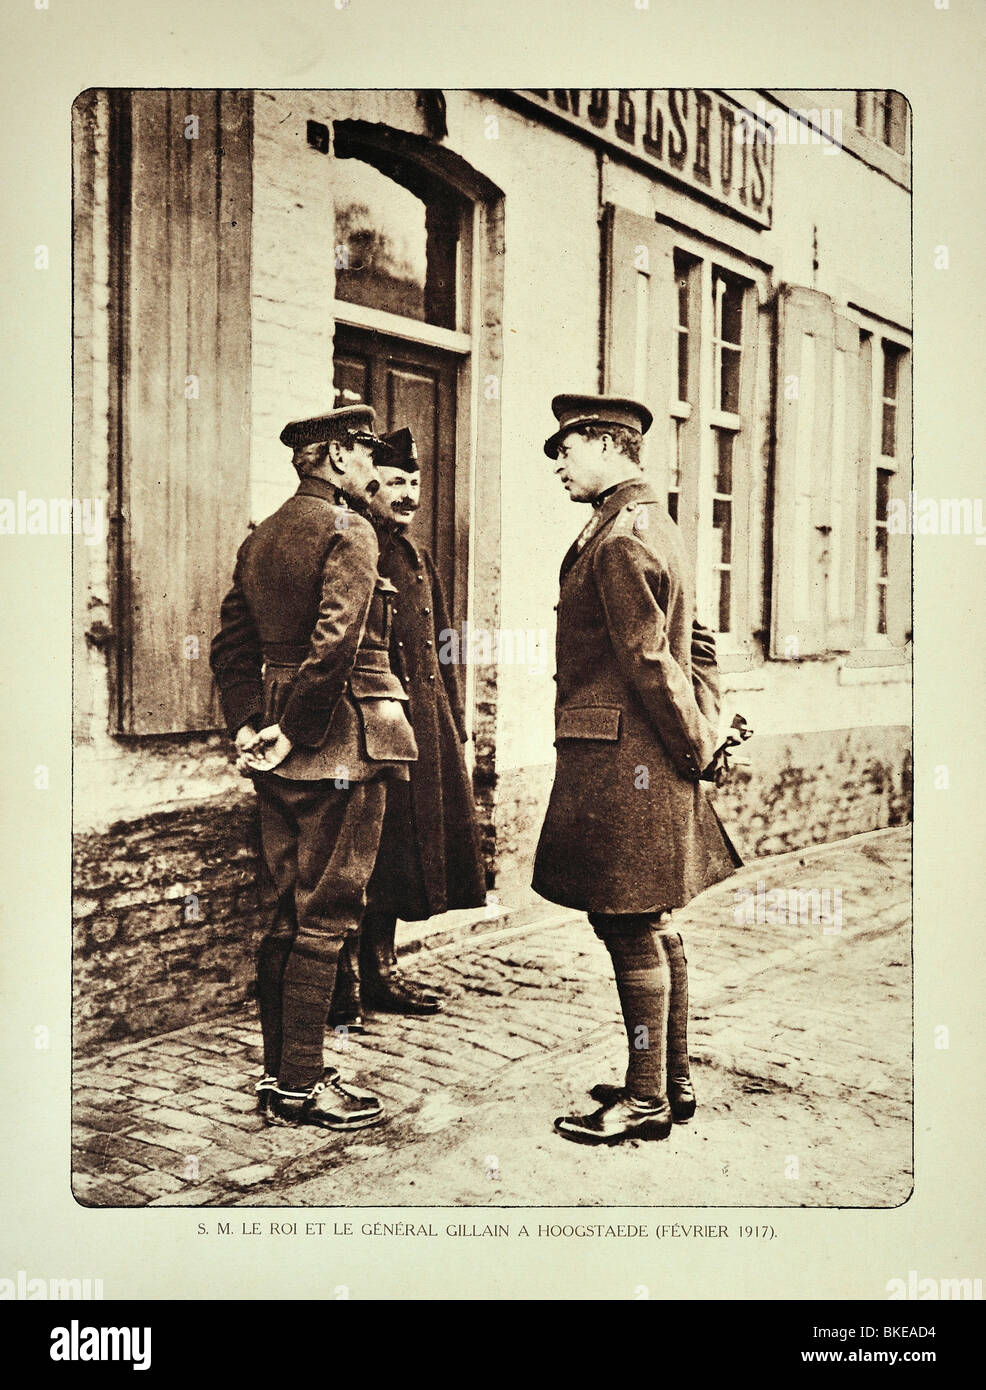 King Albert I and general Gillain at Hoogstade in West Flanders during the First World War One, Belgium Stock Photo